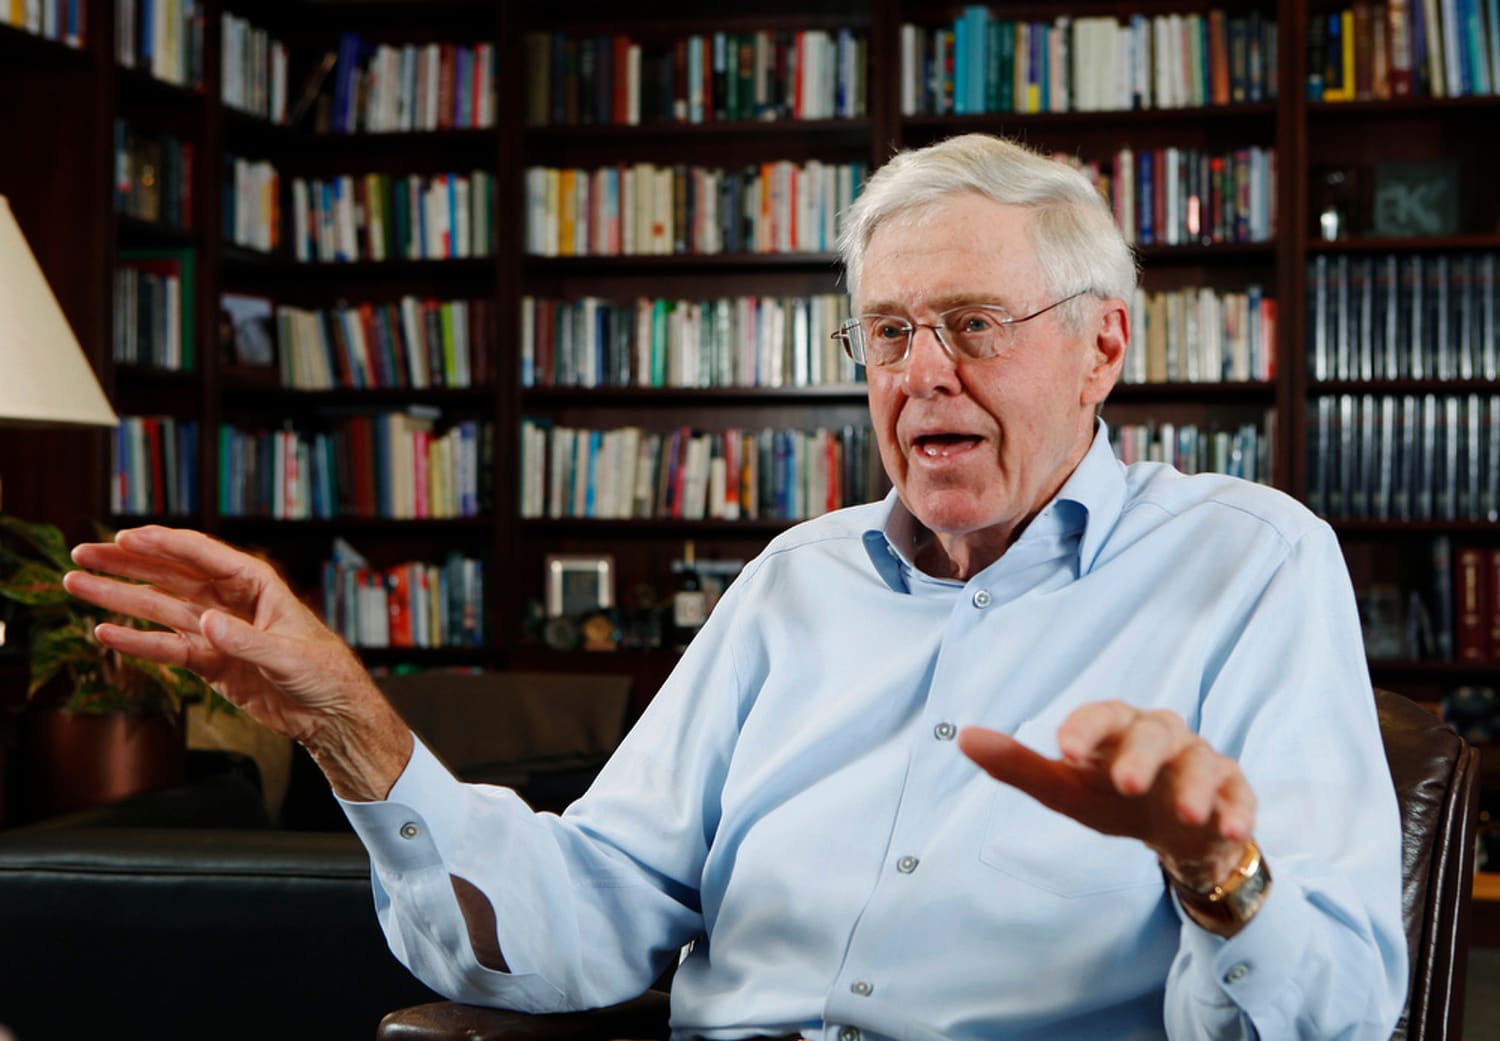 Koch group to back GOP presidential candidate who will 'write new chapter for the country'